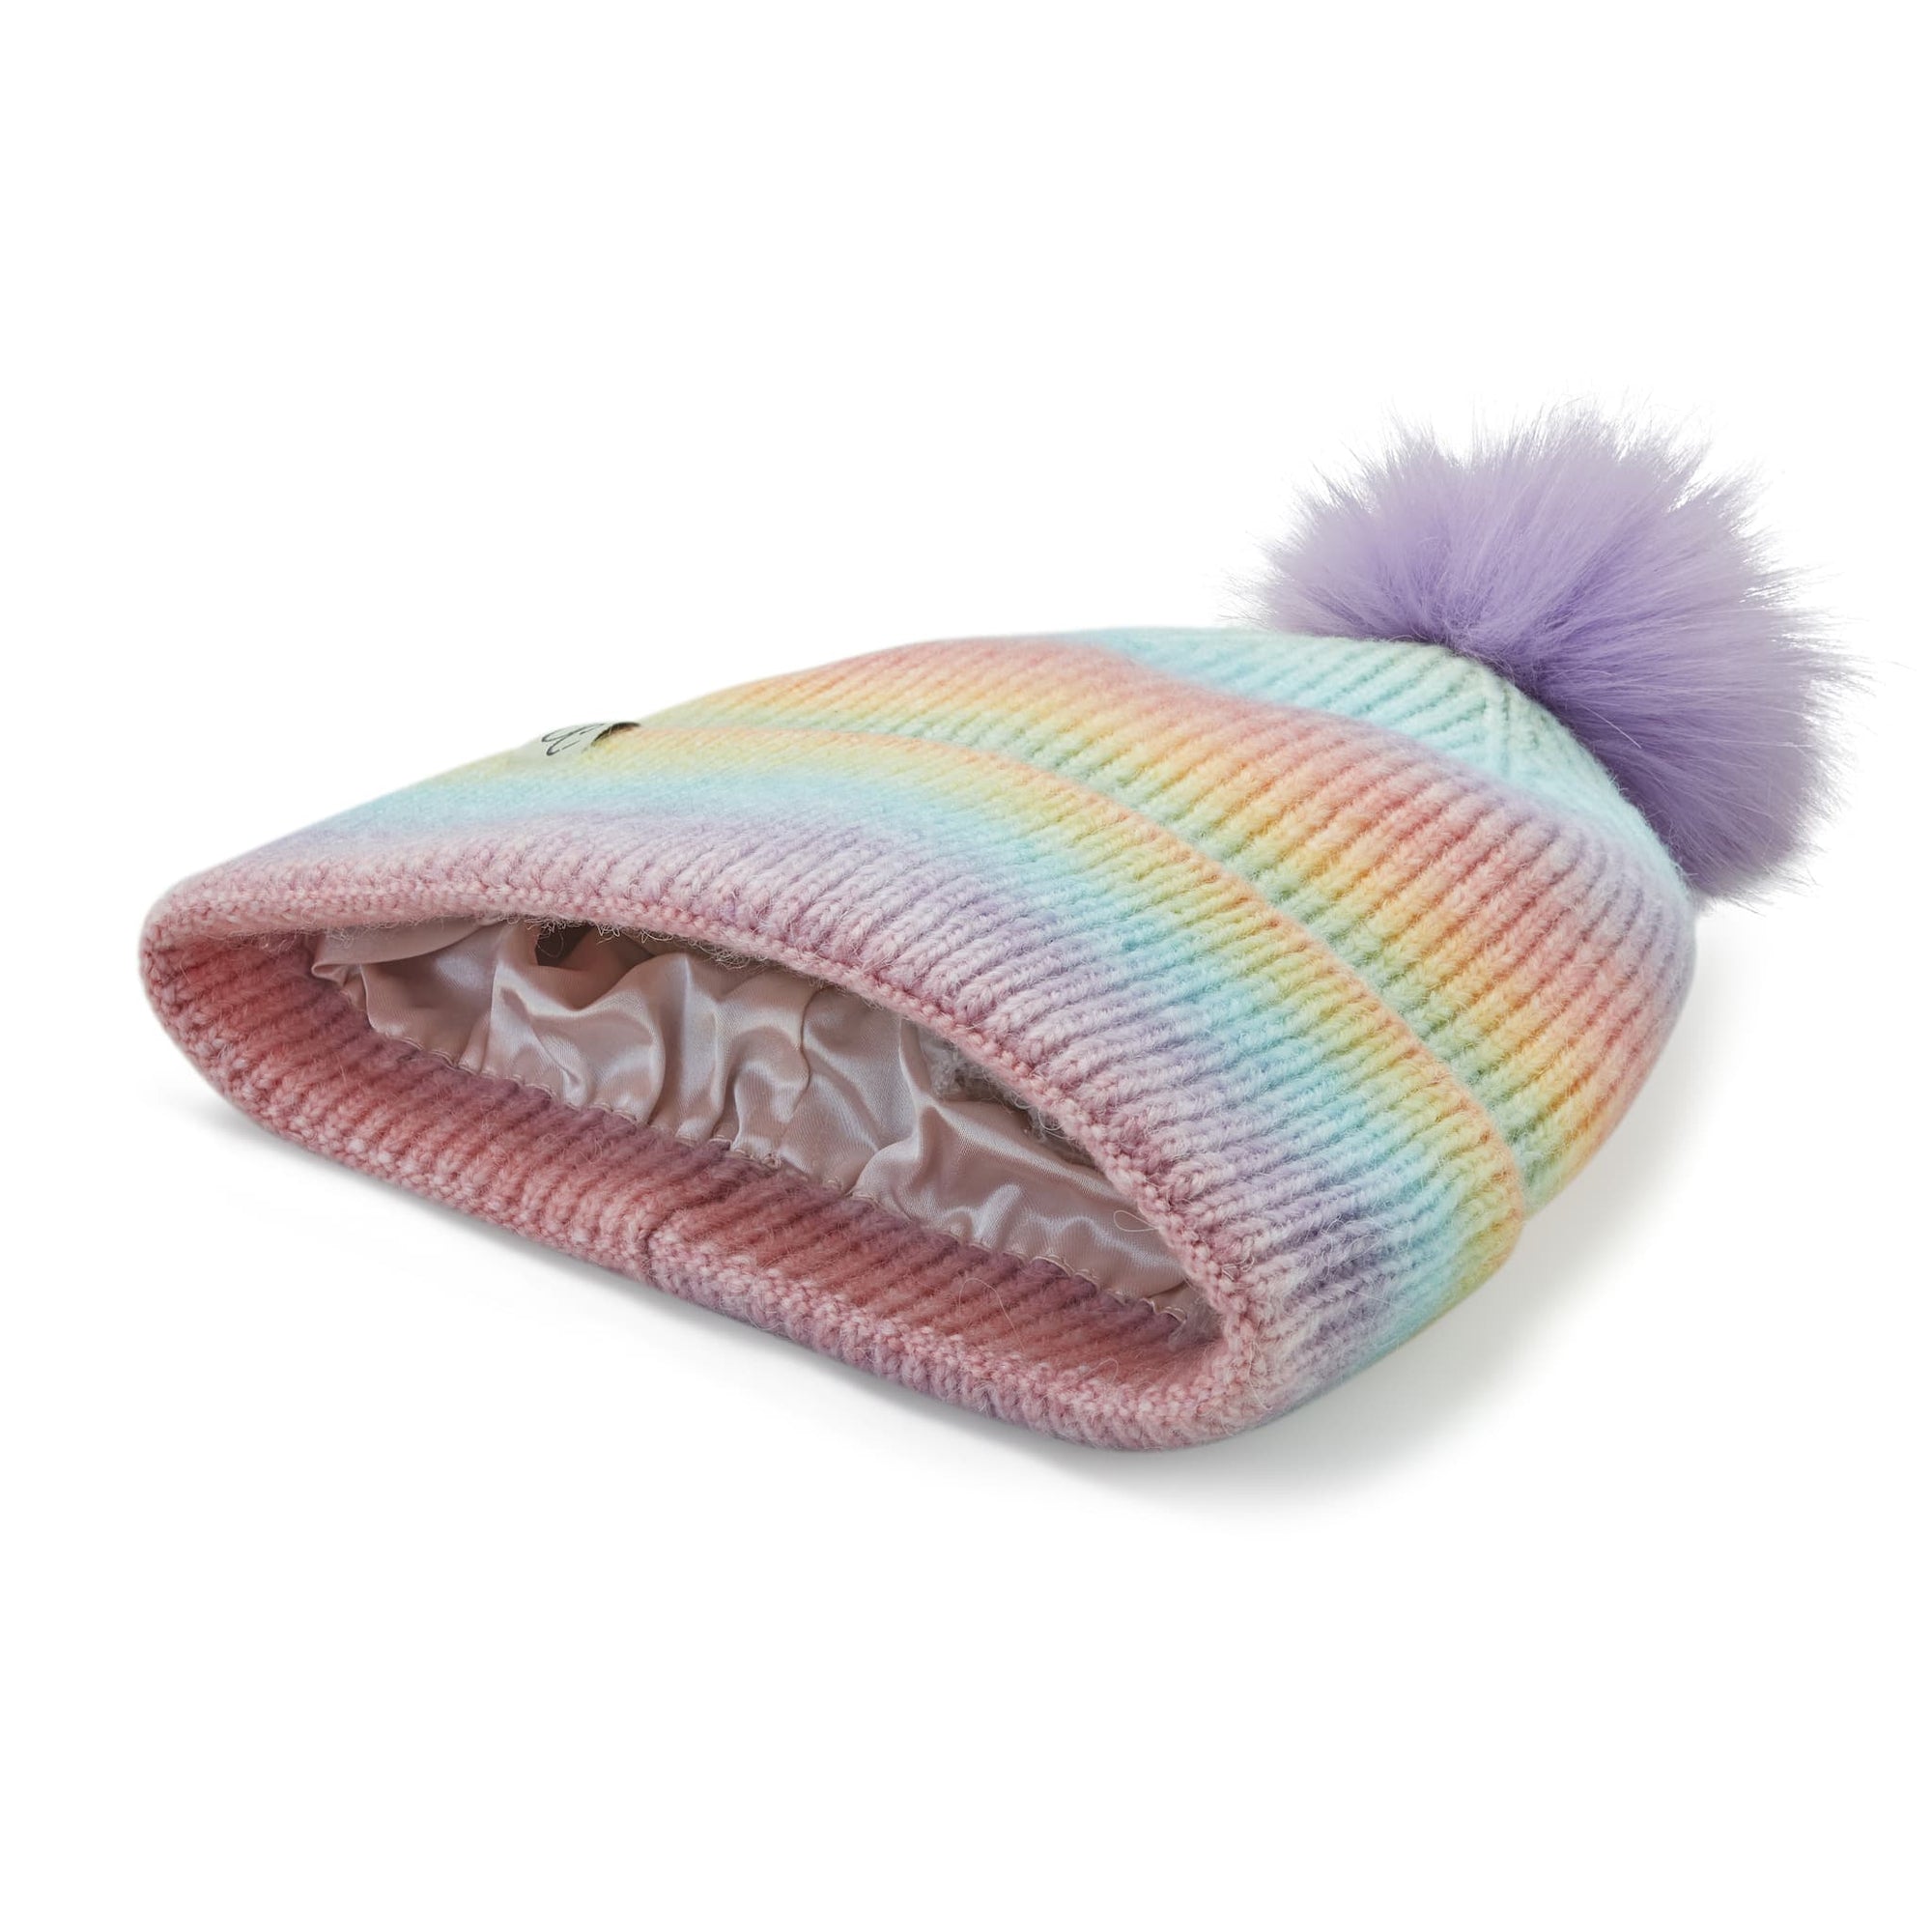 Only Curls Satin Lined Knitted Beanie Hat - Rainbow with Pom Pom - Only Curls